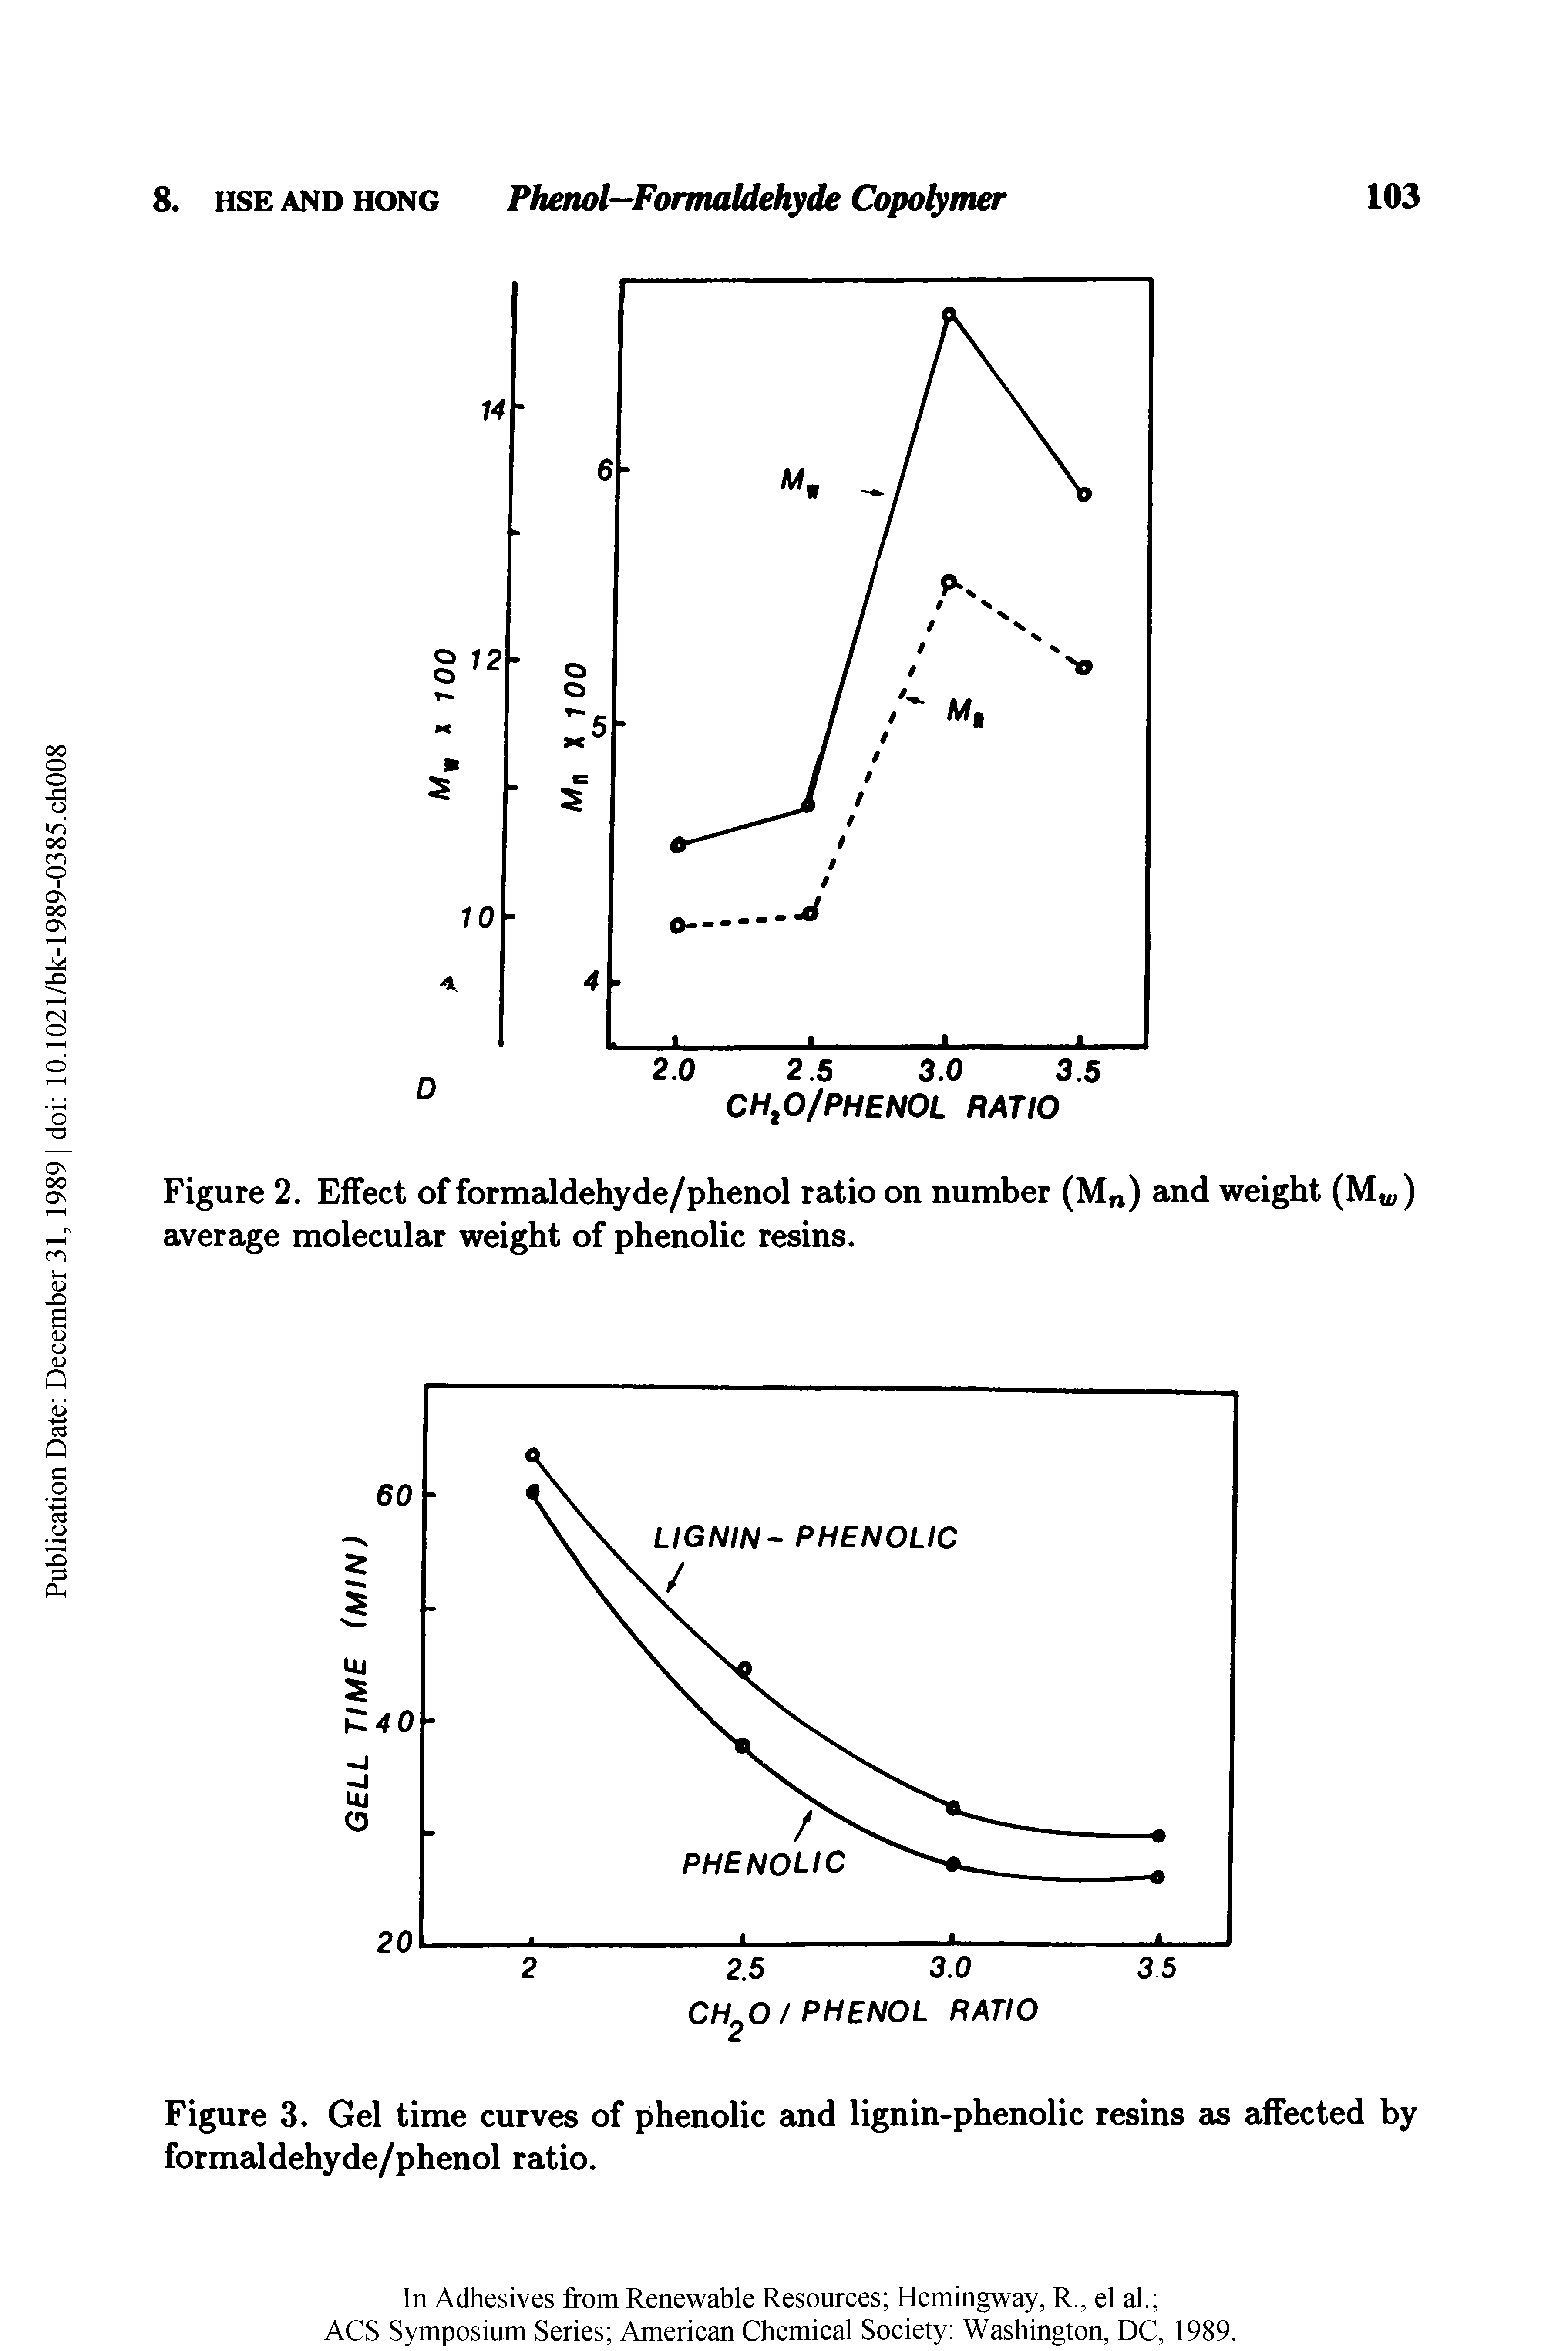 Figure 2. Effect of formaldehyde/phenol ratio on number (Mn) and weight (Mw) average molecular weight of phenolic resins.